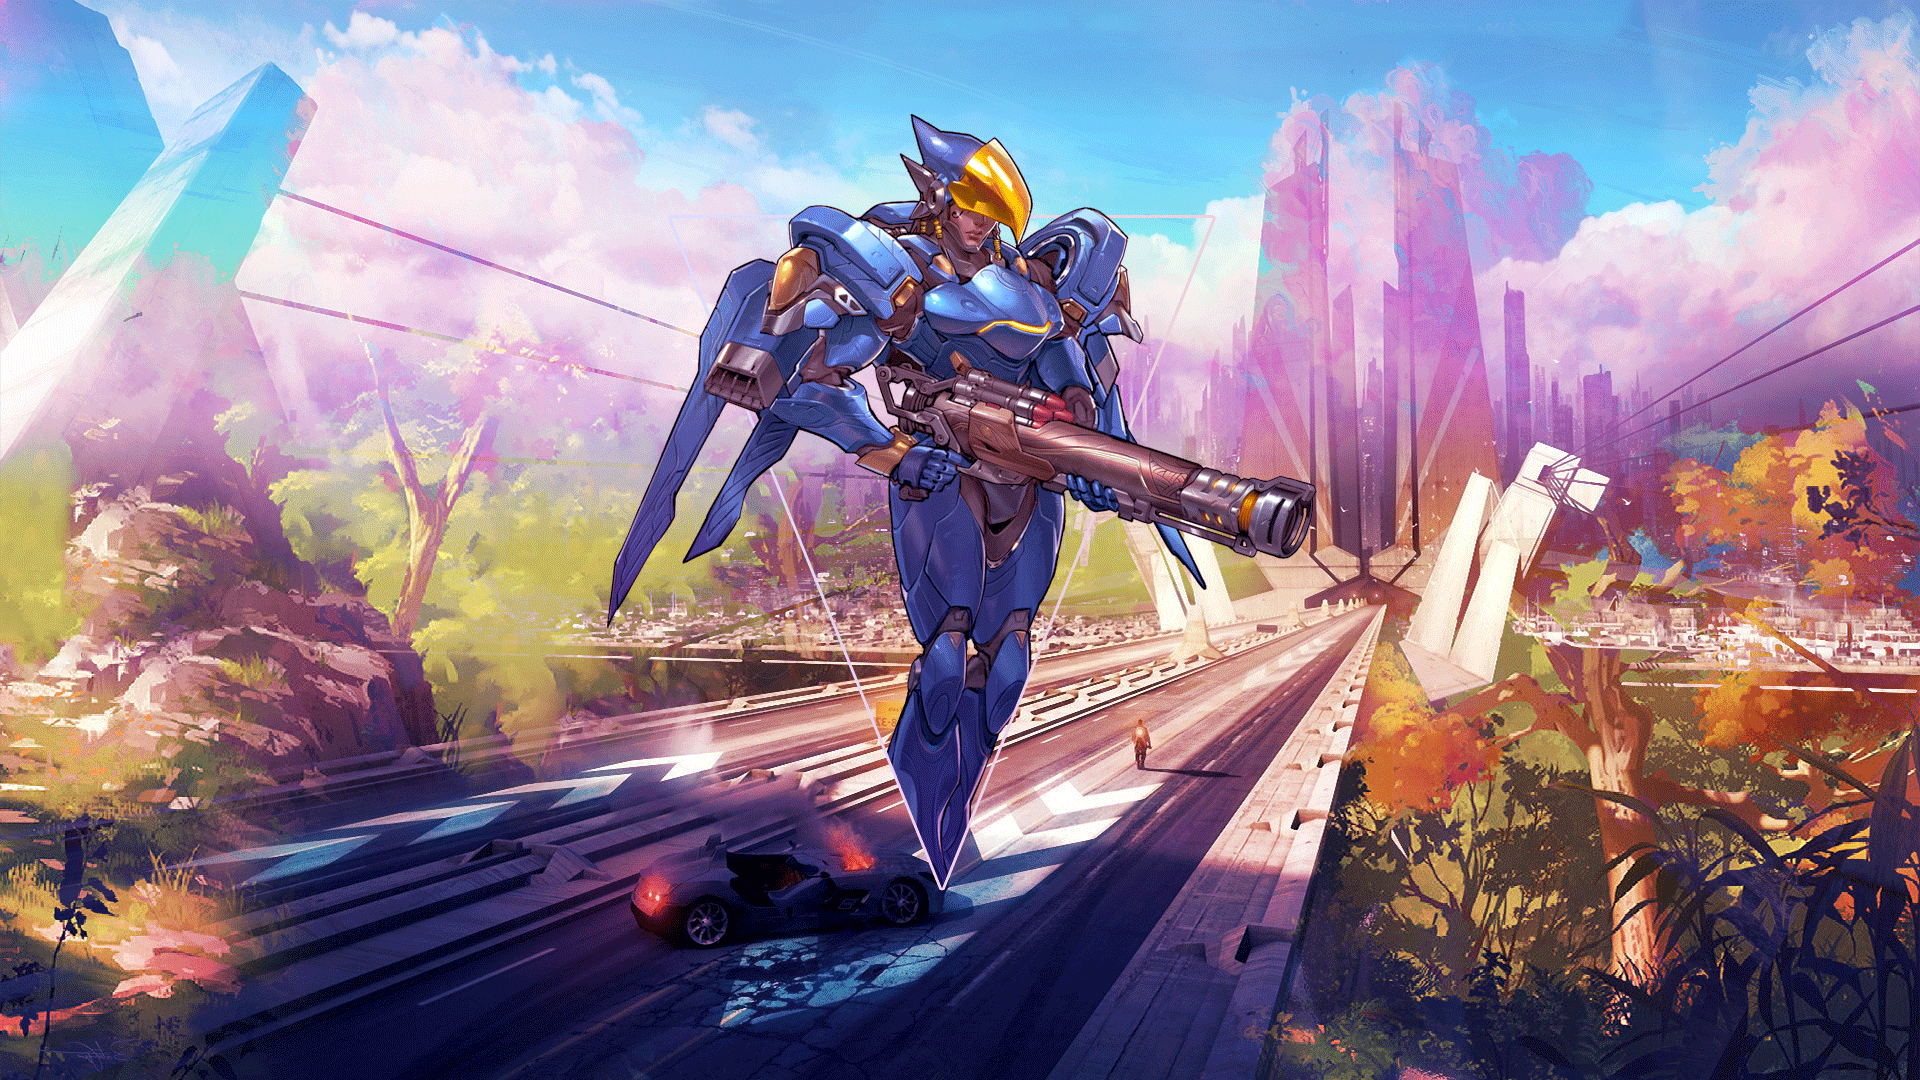 Overwatch Pharah Overwatch Anime Anime Girls PC Gaming Video Games Video Game Art Photoshop Picture  1920x1080